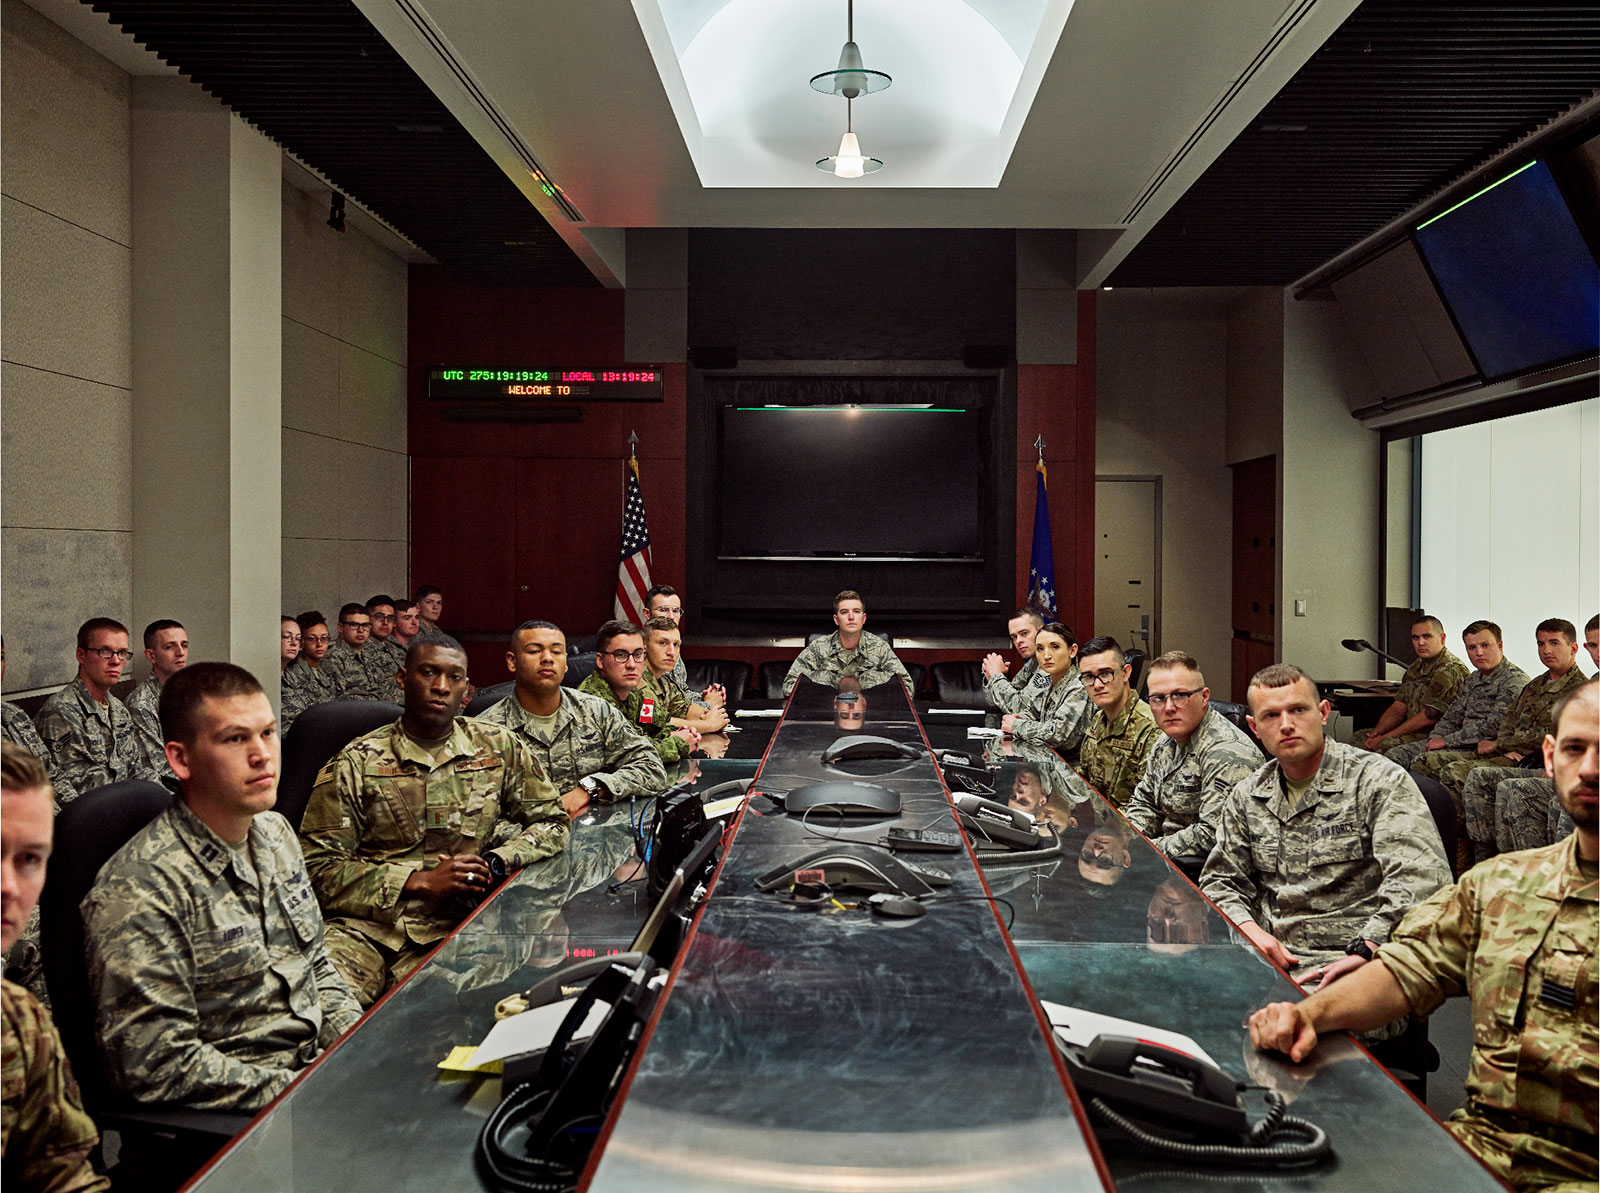 460th Space Wing mission brief at Buckley Air Force Base in Aurora, Colorado. (Spencer Lowell for TIME)